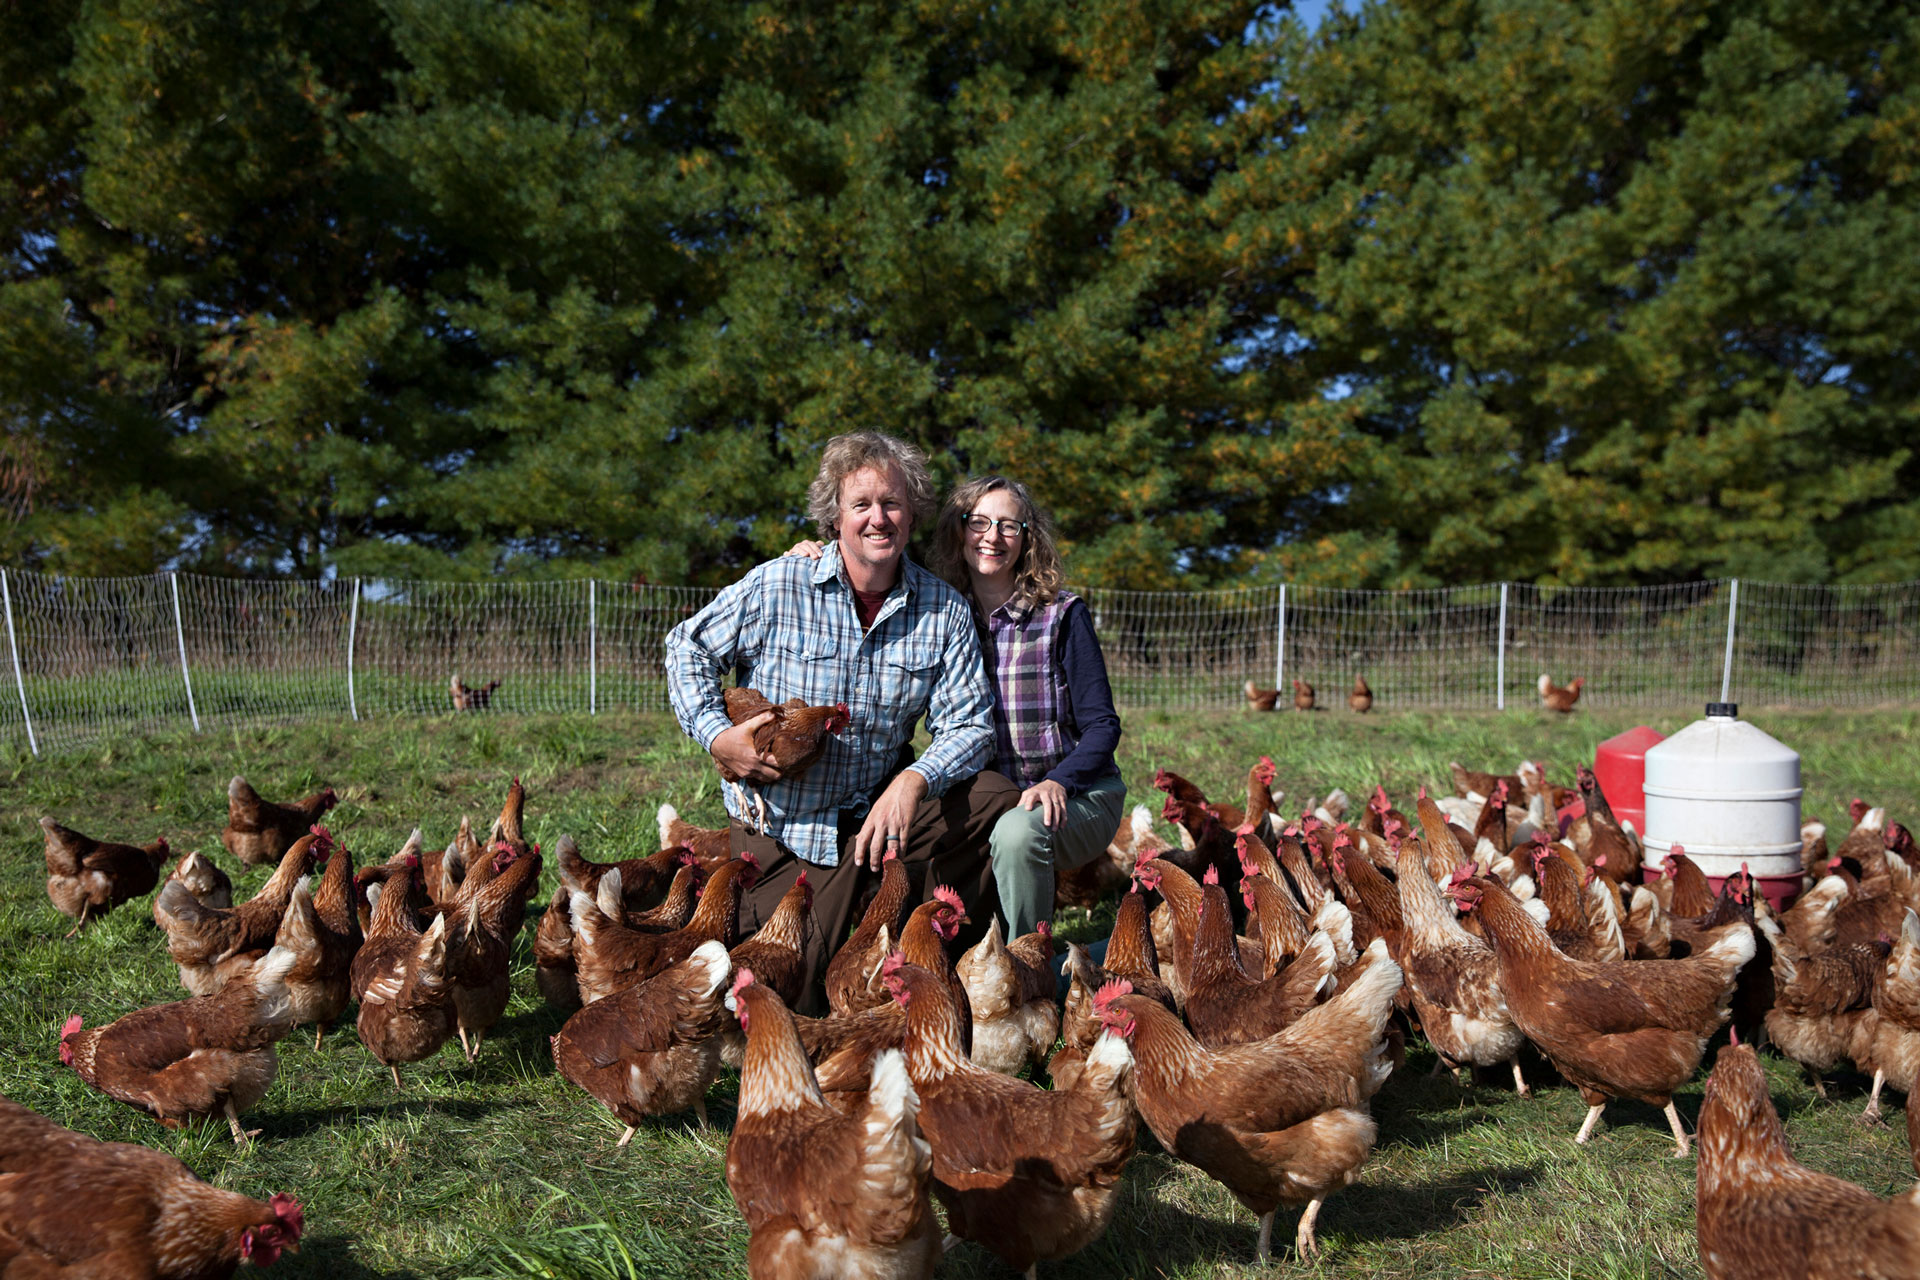 Two people stand together in a grassy field surrounded by numerous brown chickens. Both are smiling, wearing casual clothes, and appear to be on a farm known for its locally laid eggs. The background features a line of trees and fencing enclosing the area.